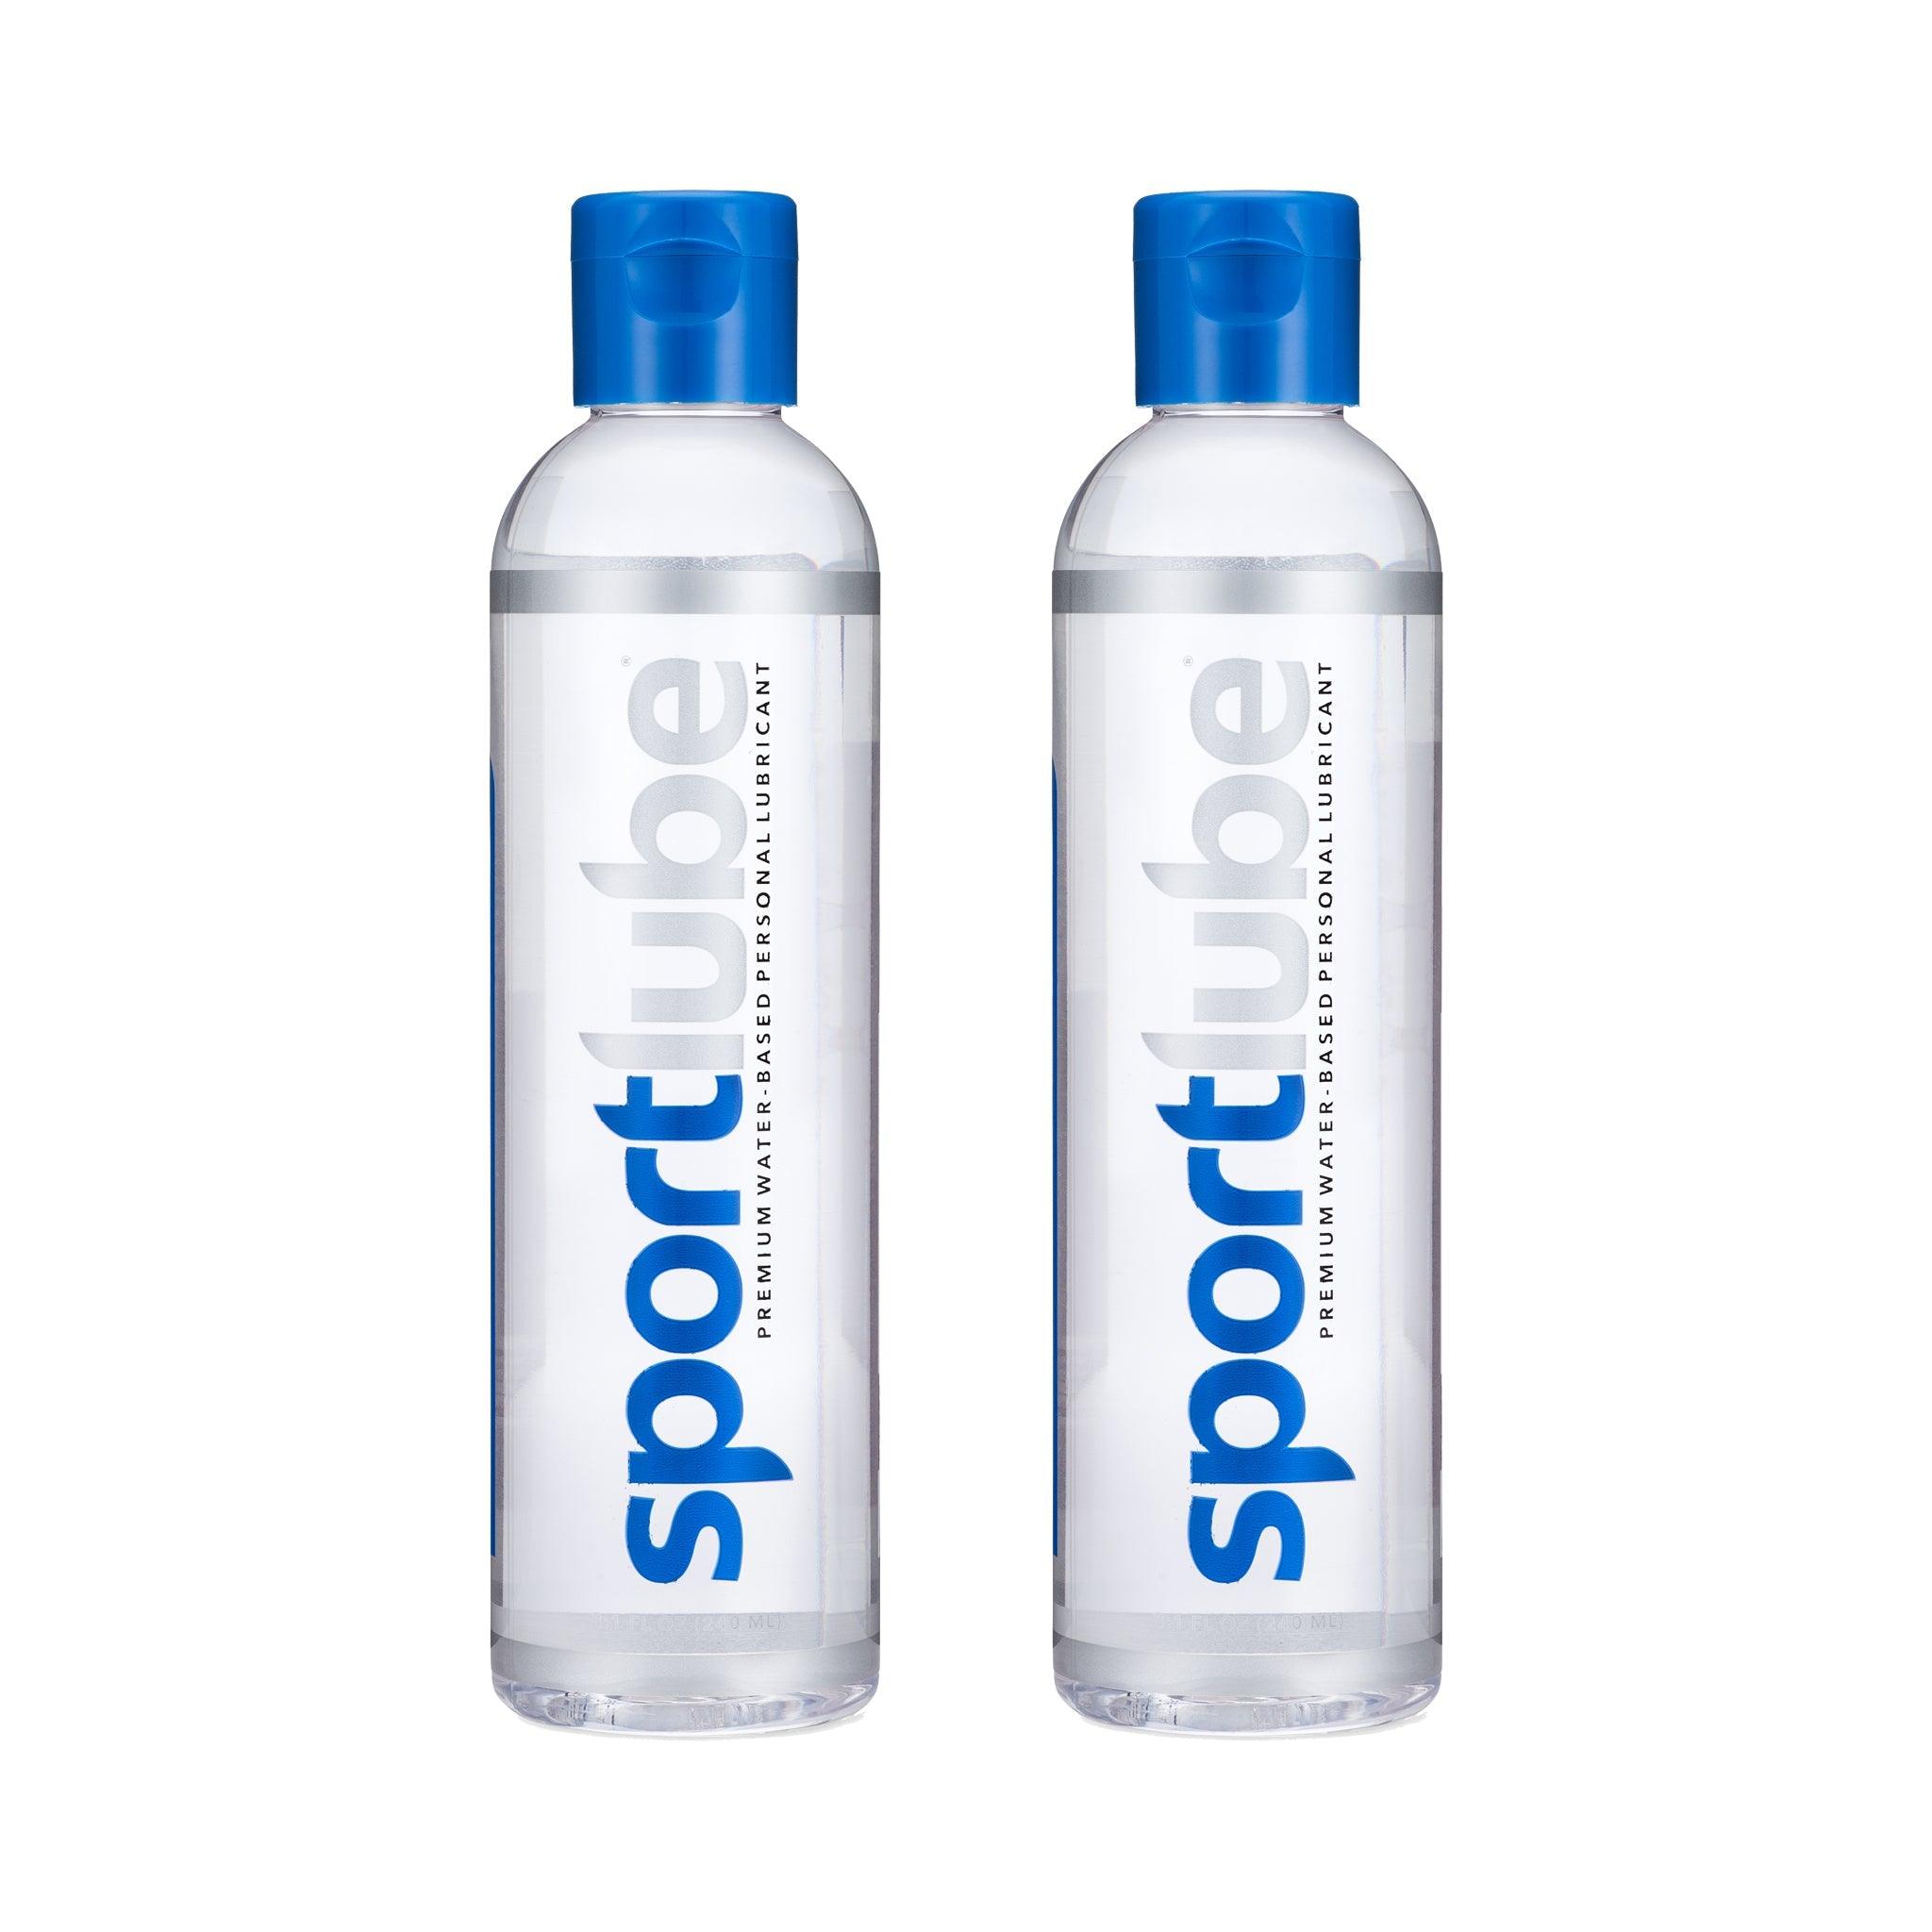 SportLube Premium Thicker Water-Based Personal Lubricant - CheapLubes.com